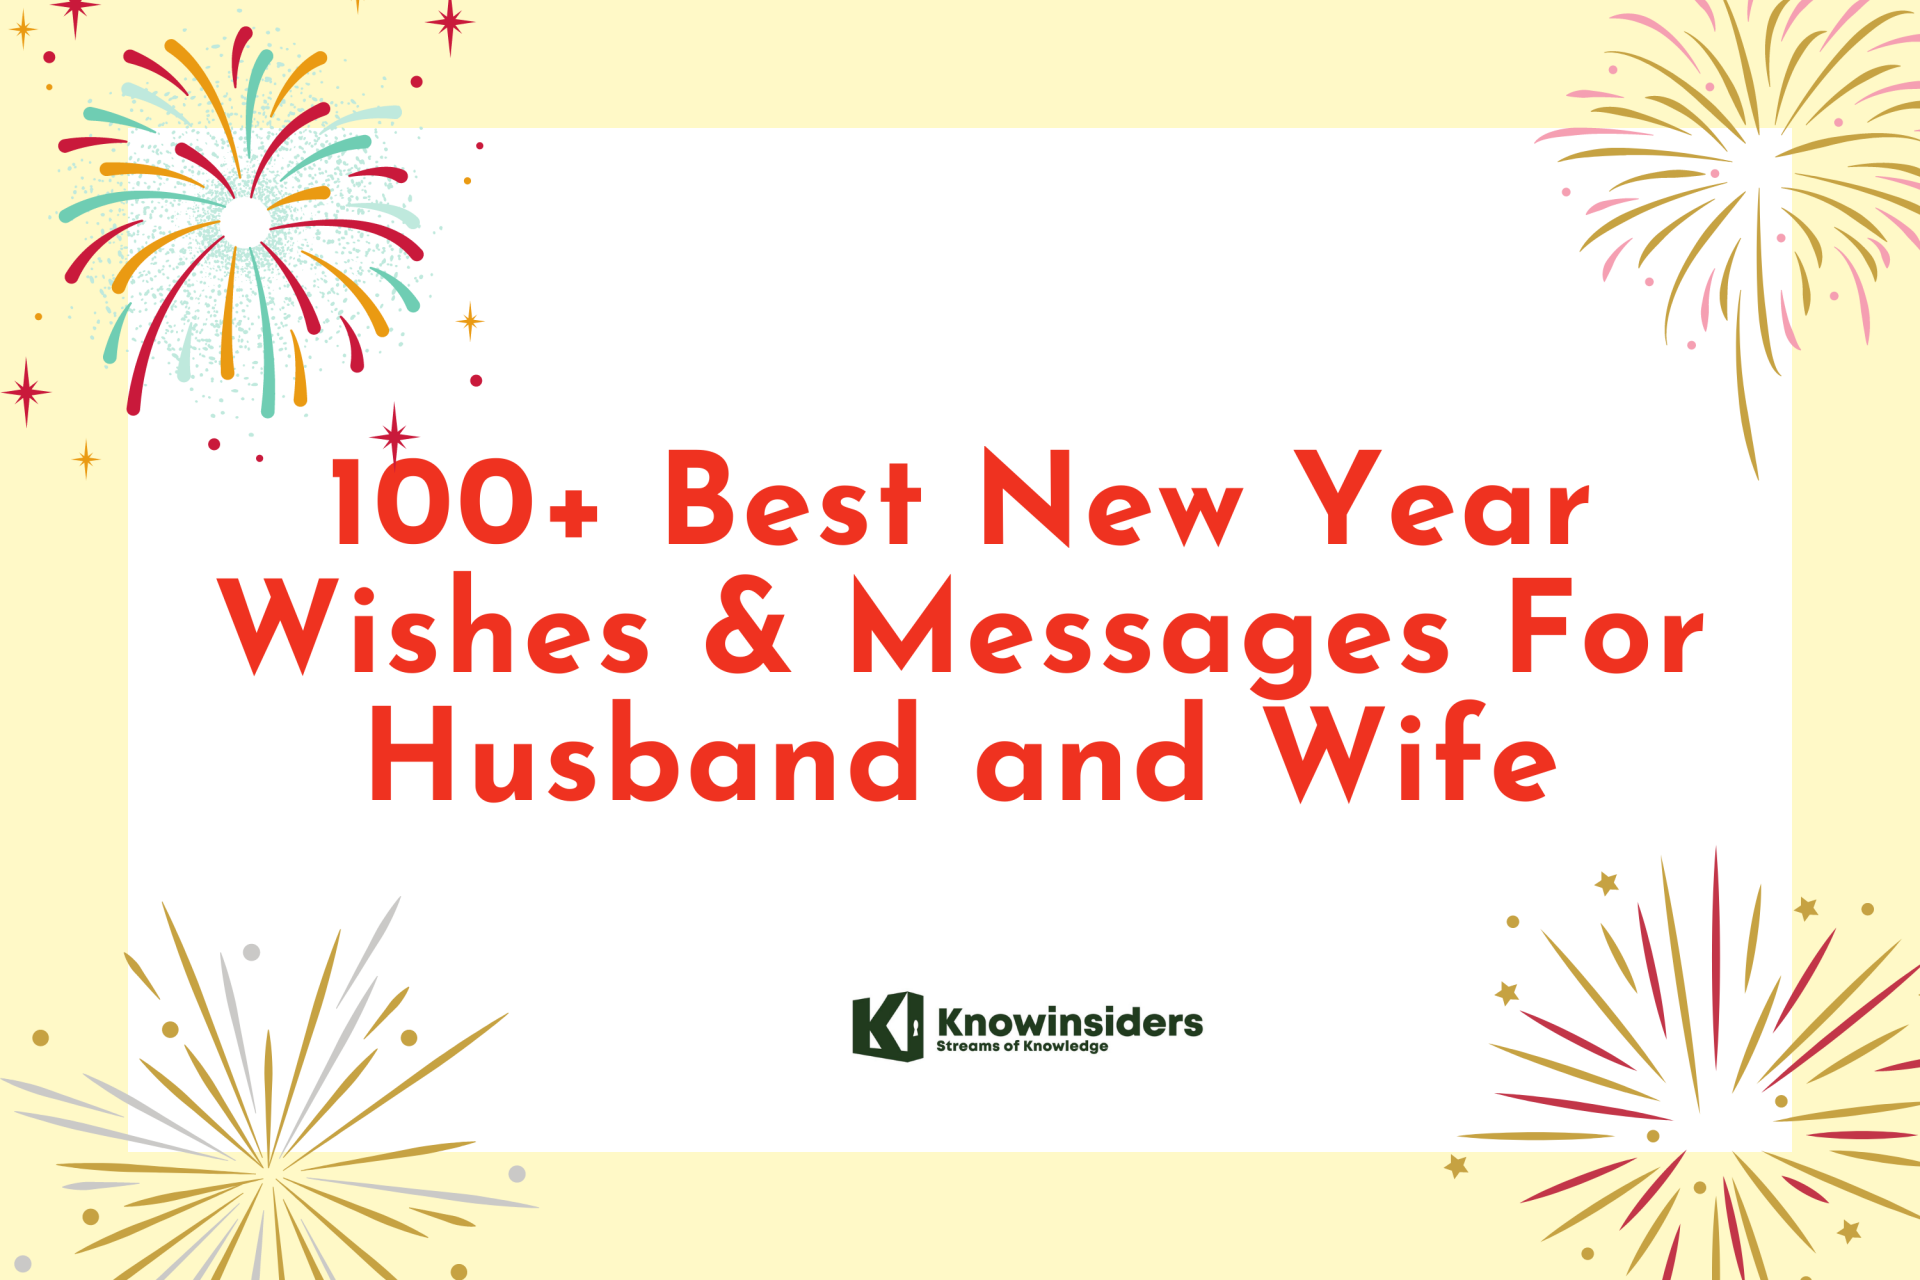 100+ Best New Year Wishes & Messages For Husband and Wife